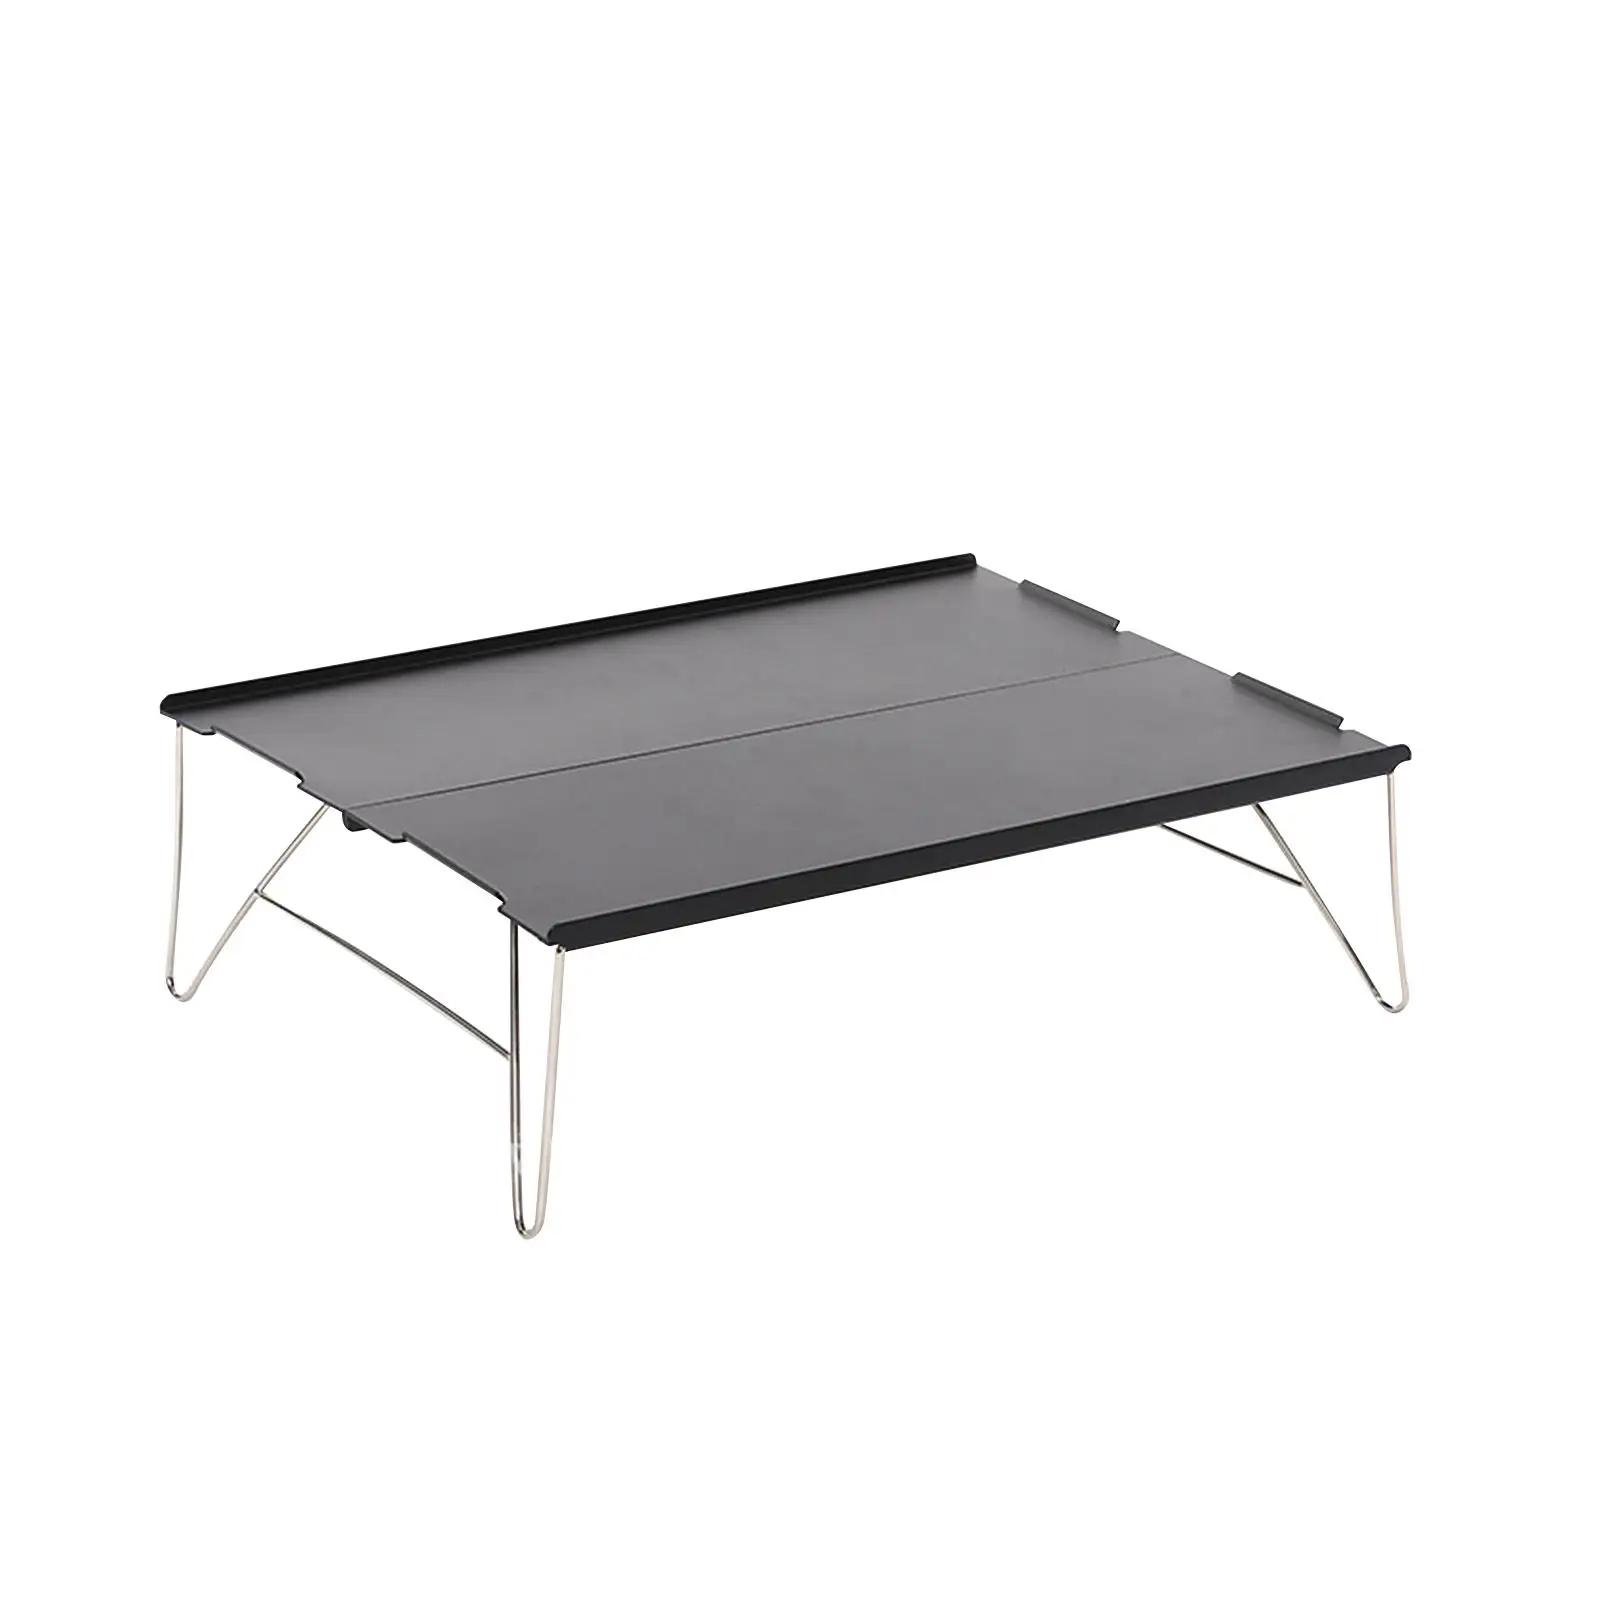 Camp Table Aluminum Alloy Lightweight Computer Desk Multifunctional Portable Small for Picnic Travel Outdoor Patio Small Space